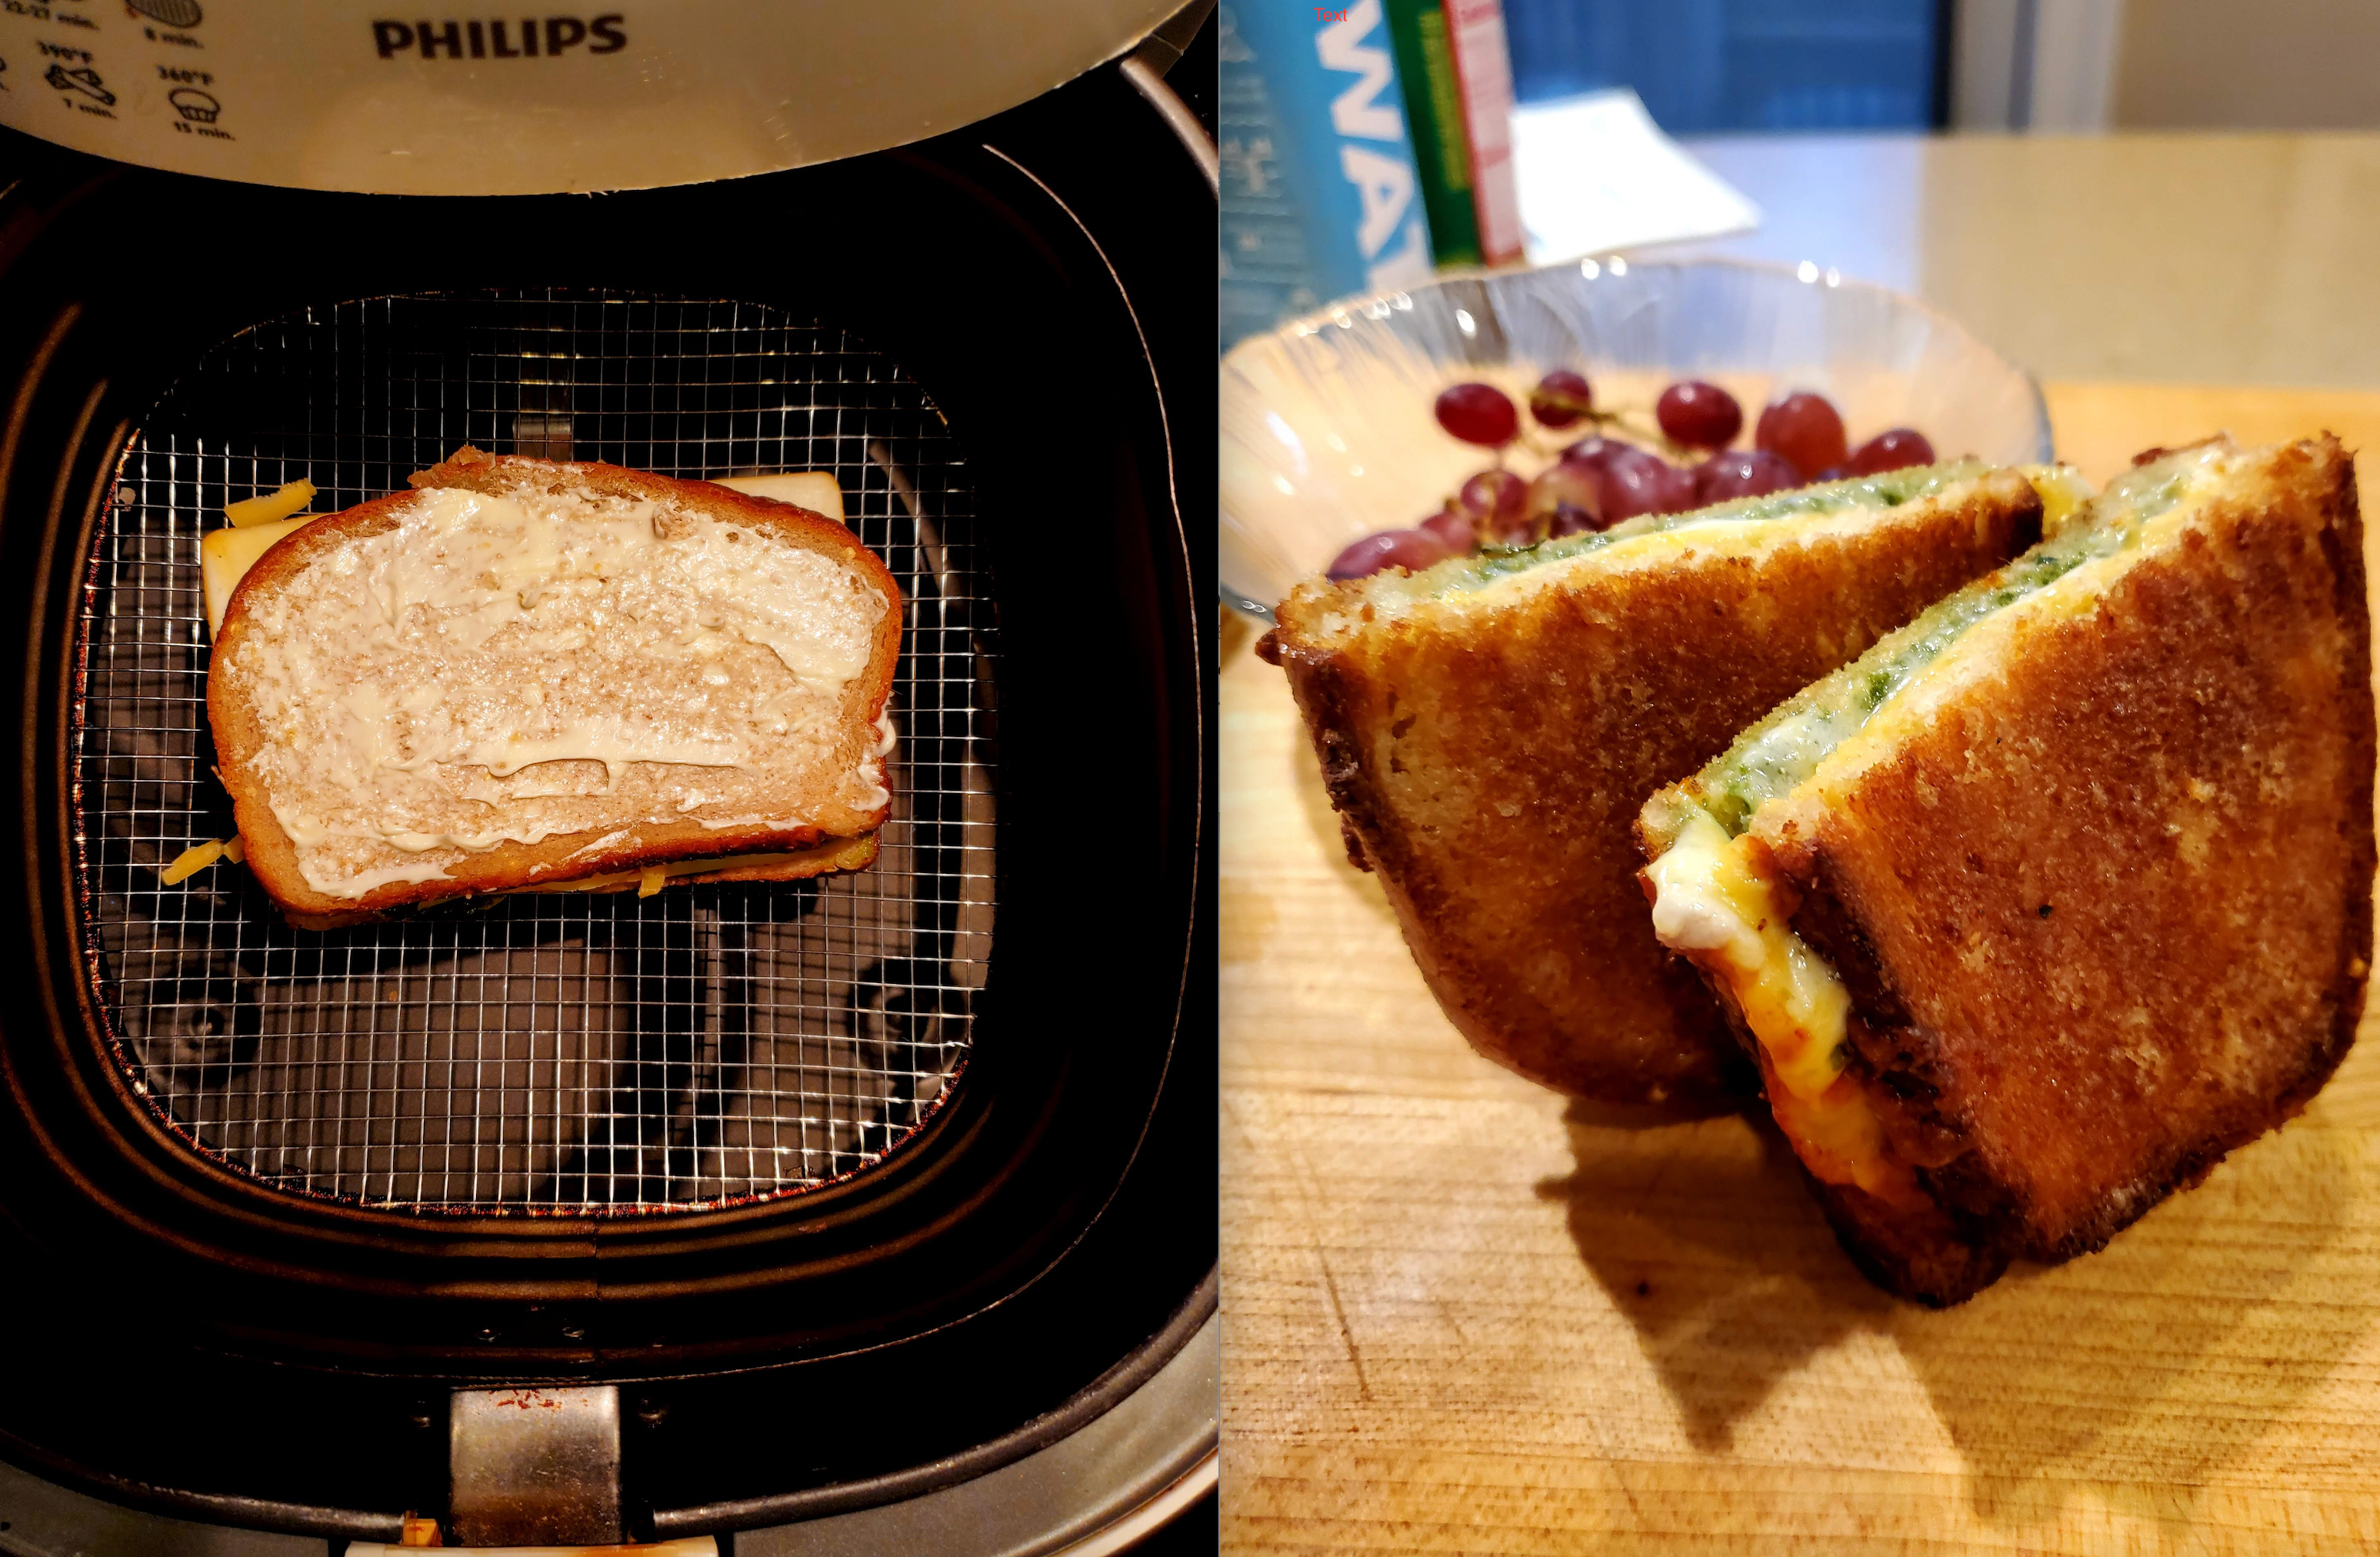 the best recipe for a tasty sandwich on national grilled cheese day starts with great bread